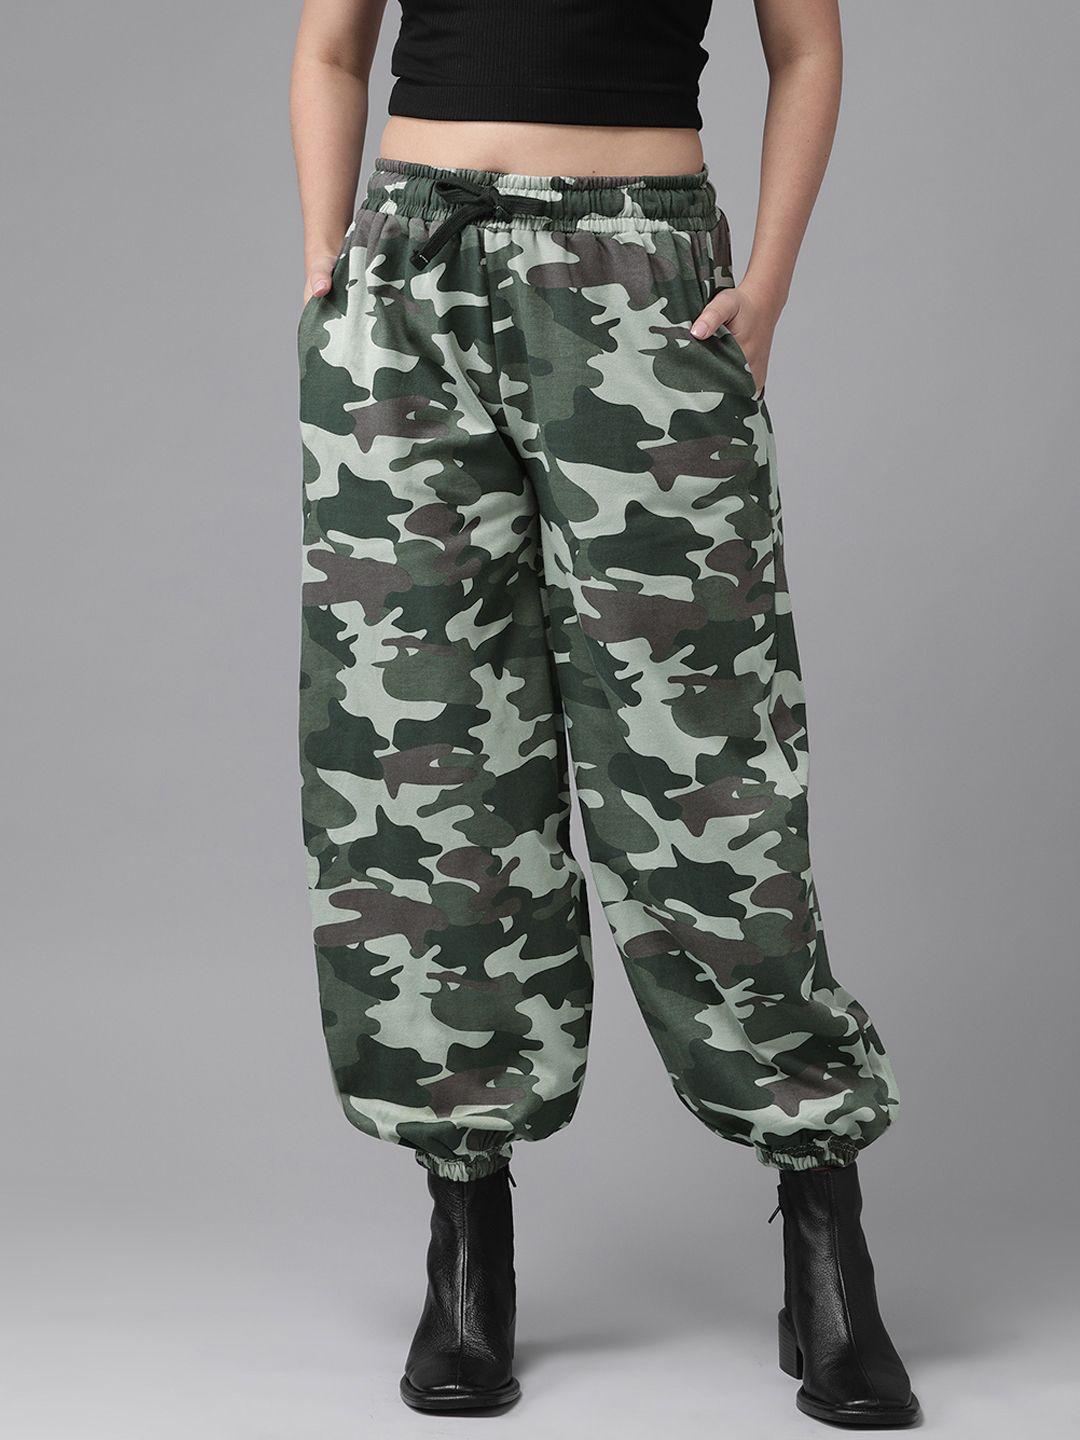 the dry state womens camouflage printed aop jogger